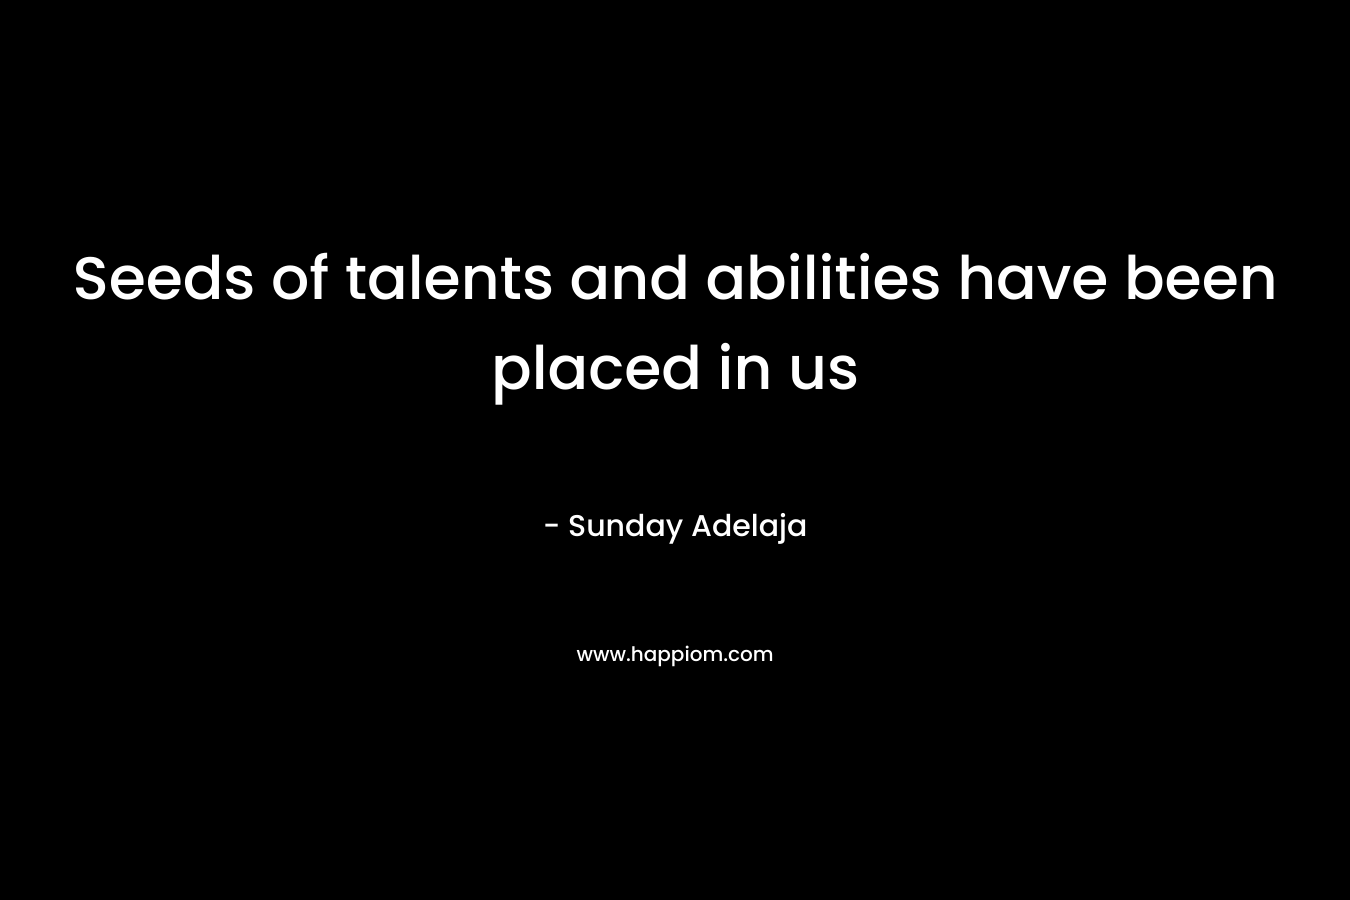 Seeds of talents and abilities have been placed in us